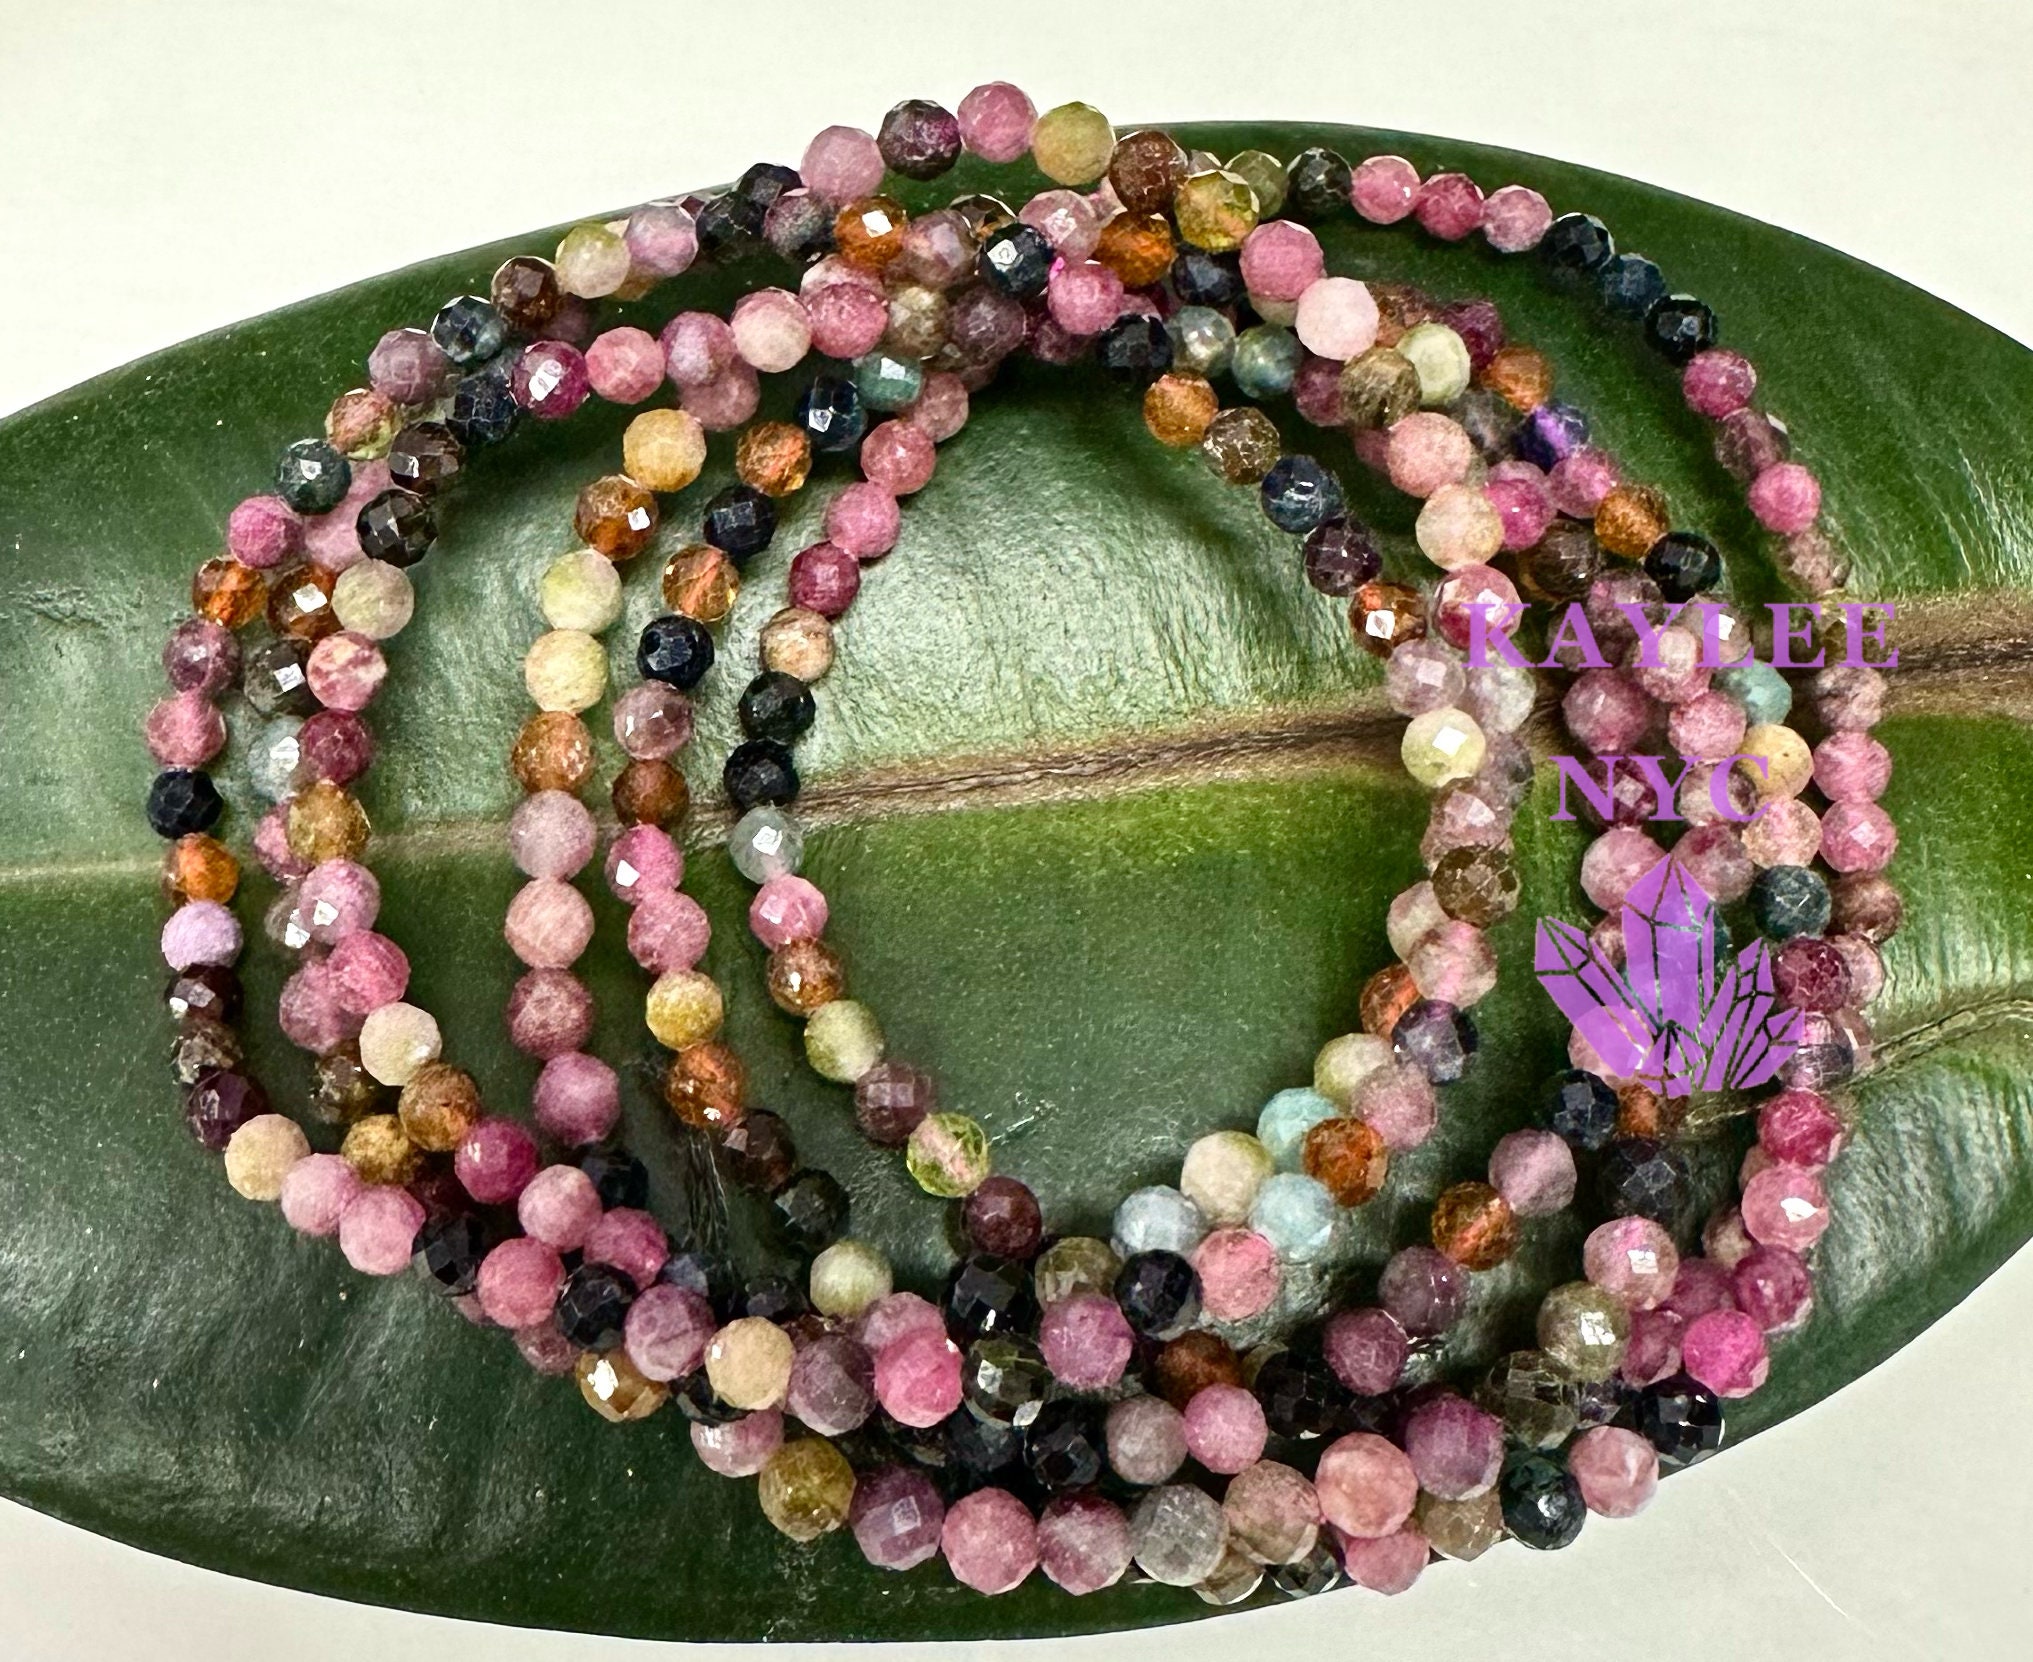 Veemake Tourmaline Faceted Round Yellow Green Pink Beads For Jewelry Making  Natural Stones Gemstones 07932 - AliExpress